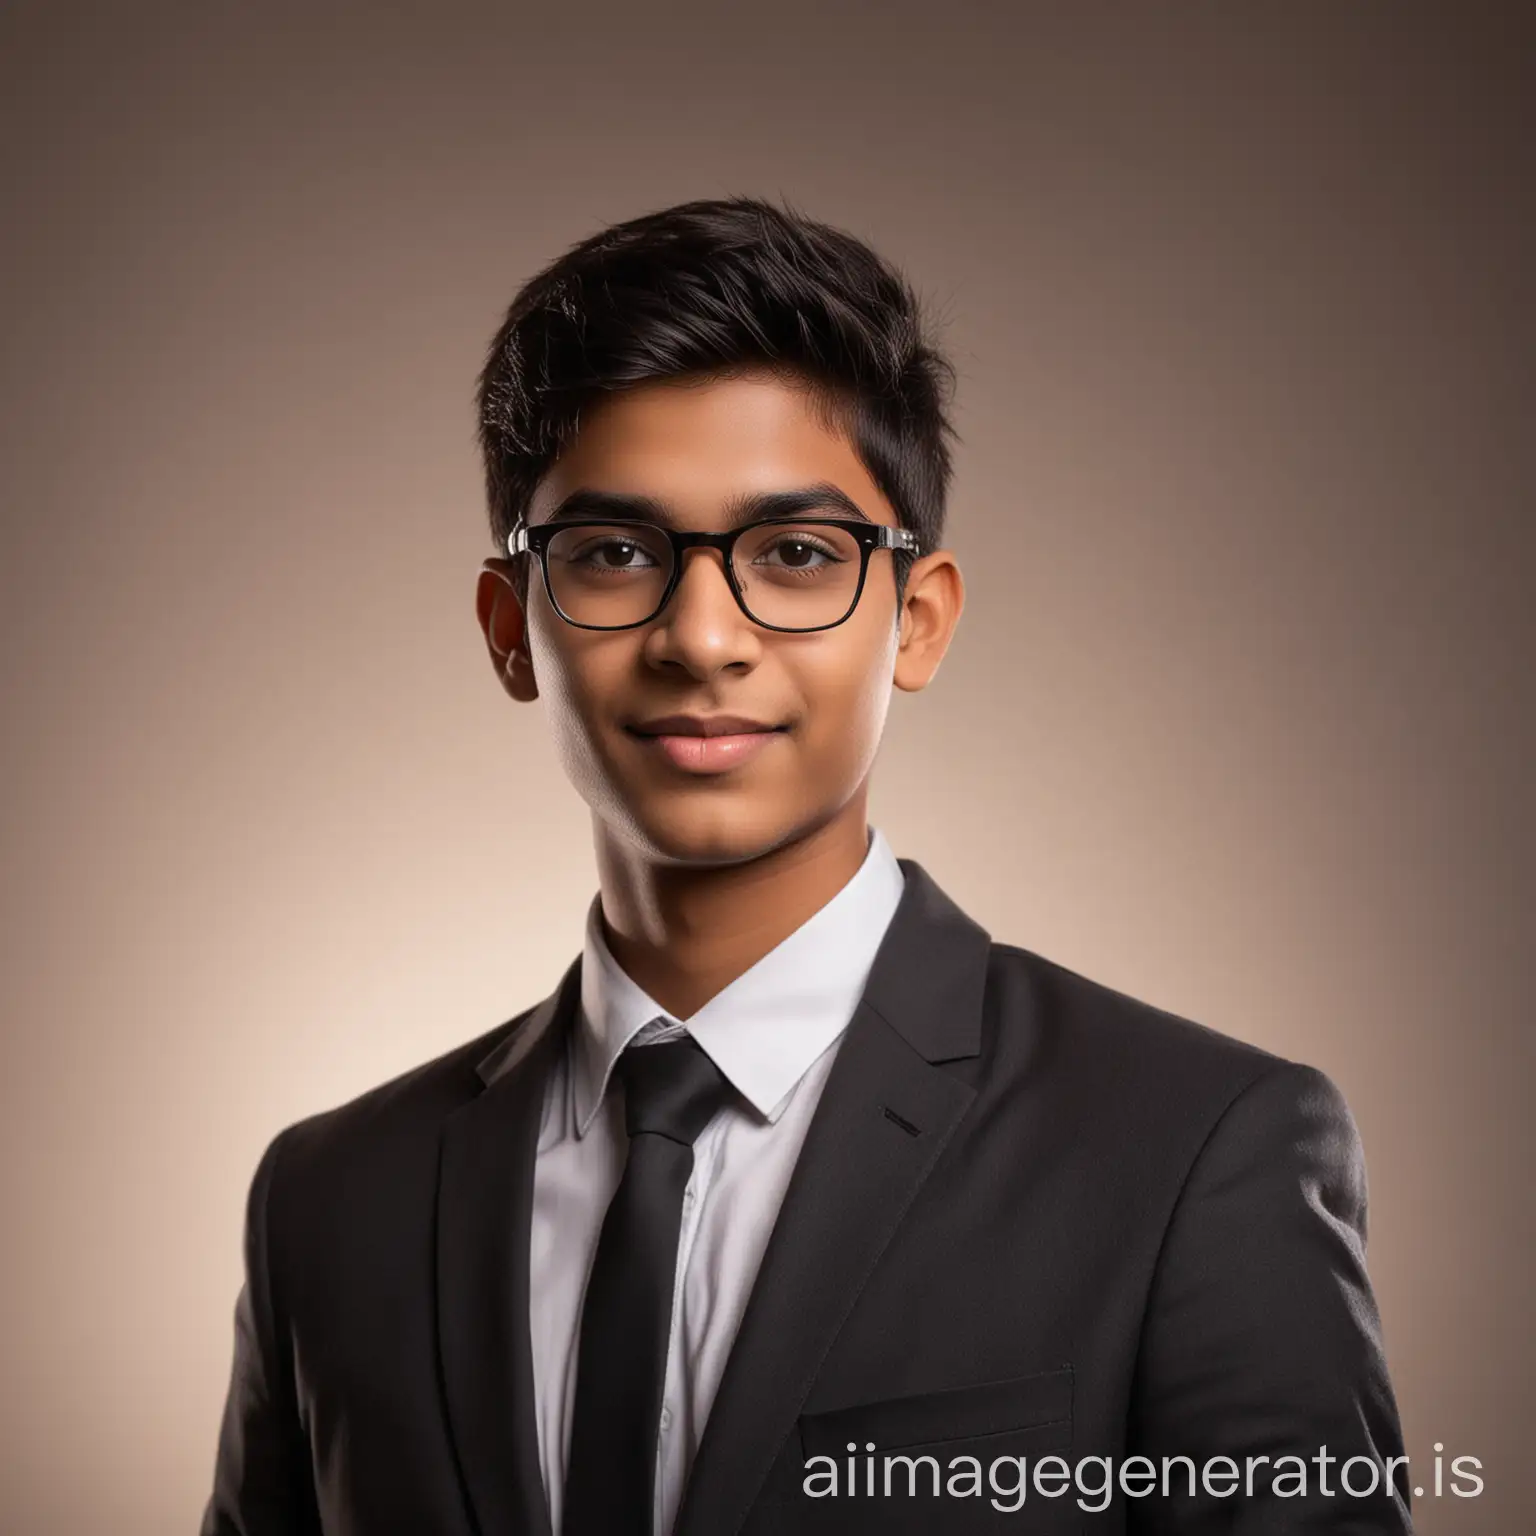 18 year old indian boy With fair skin Wearing spectacles and narrow body Posing for a linkedin picture in formalsformed light in background